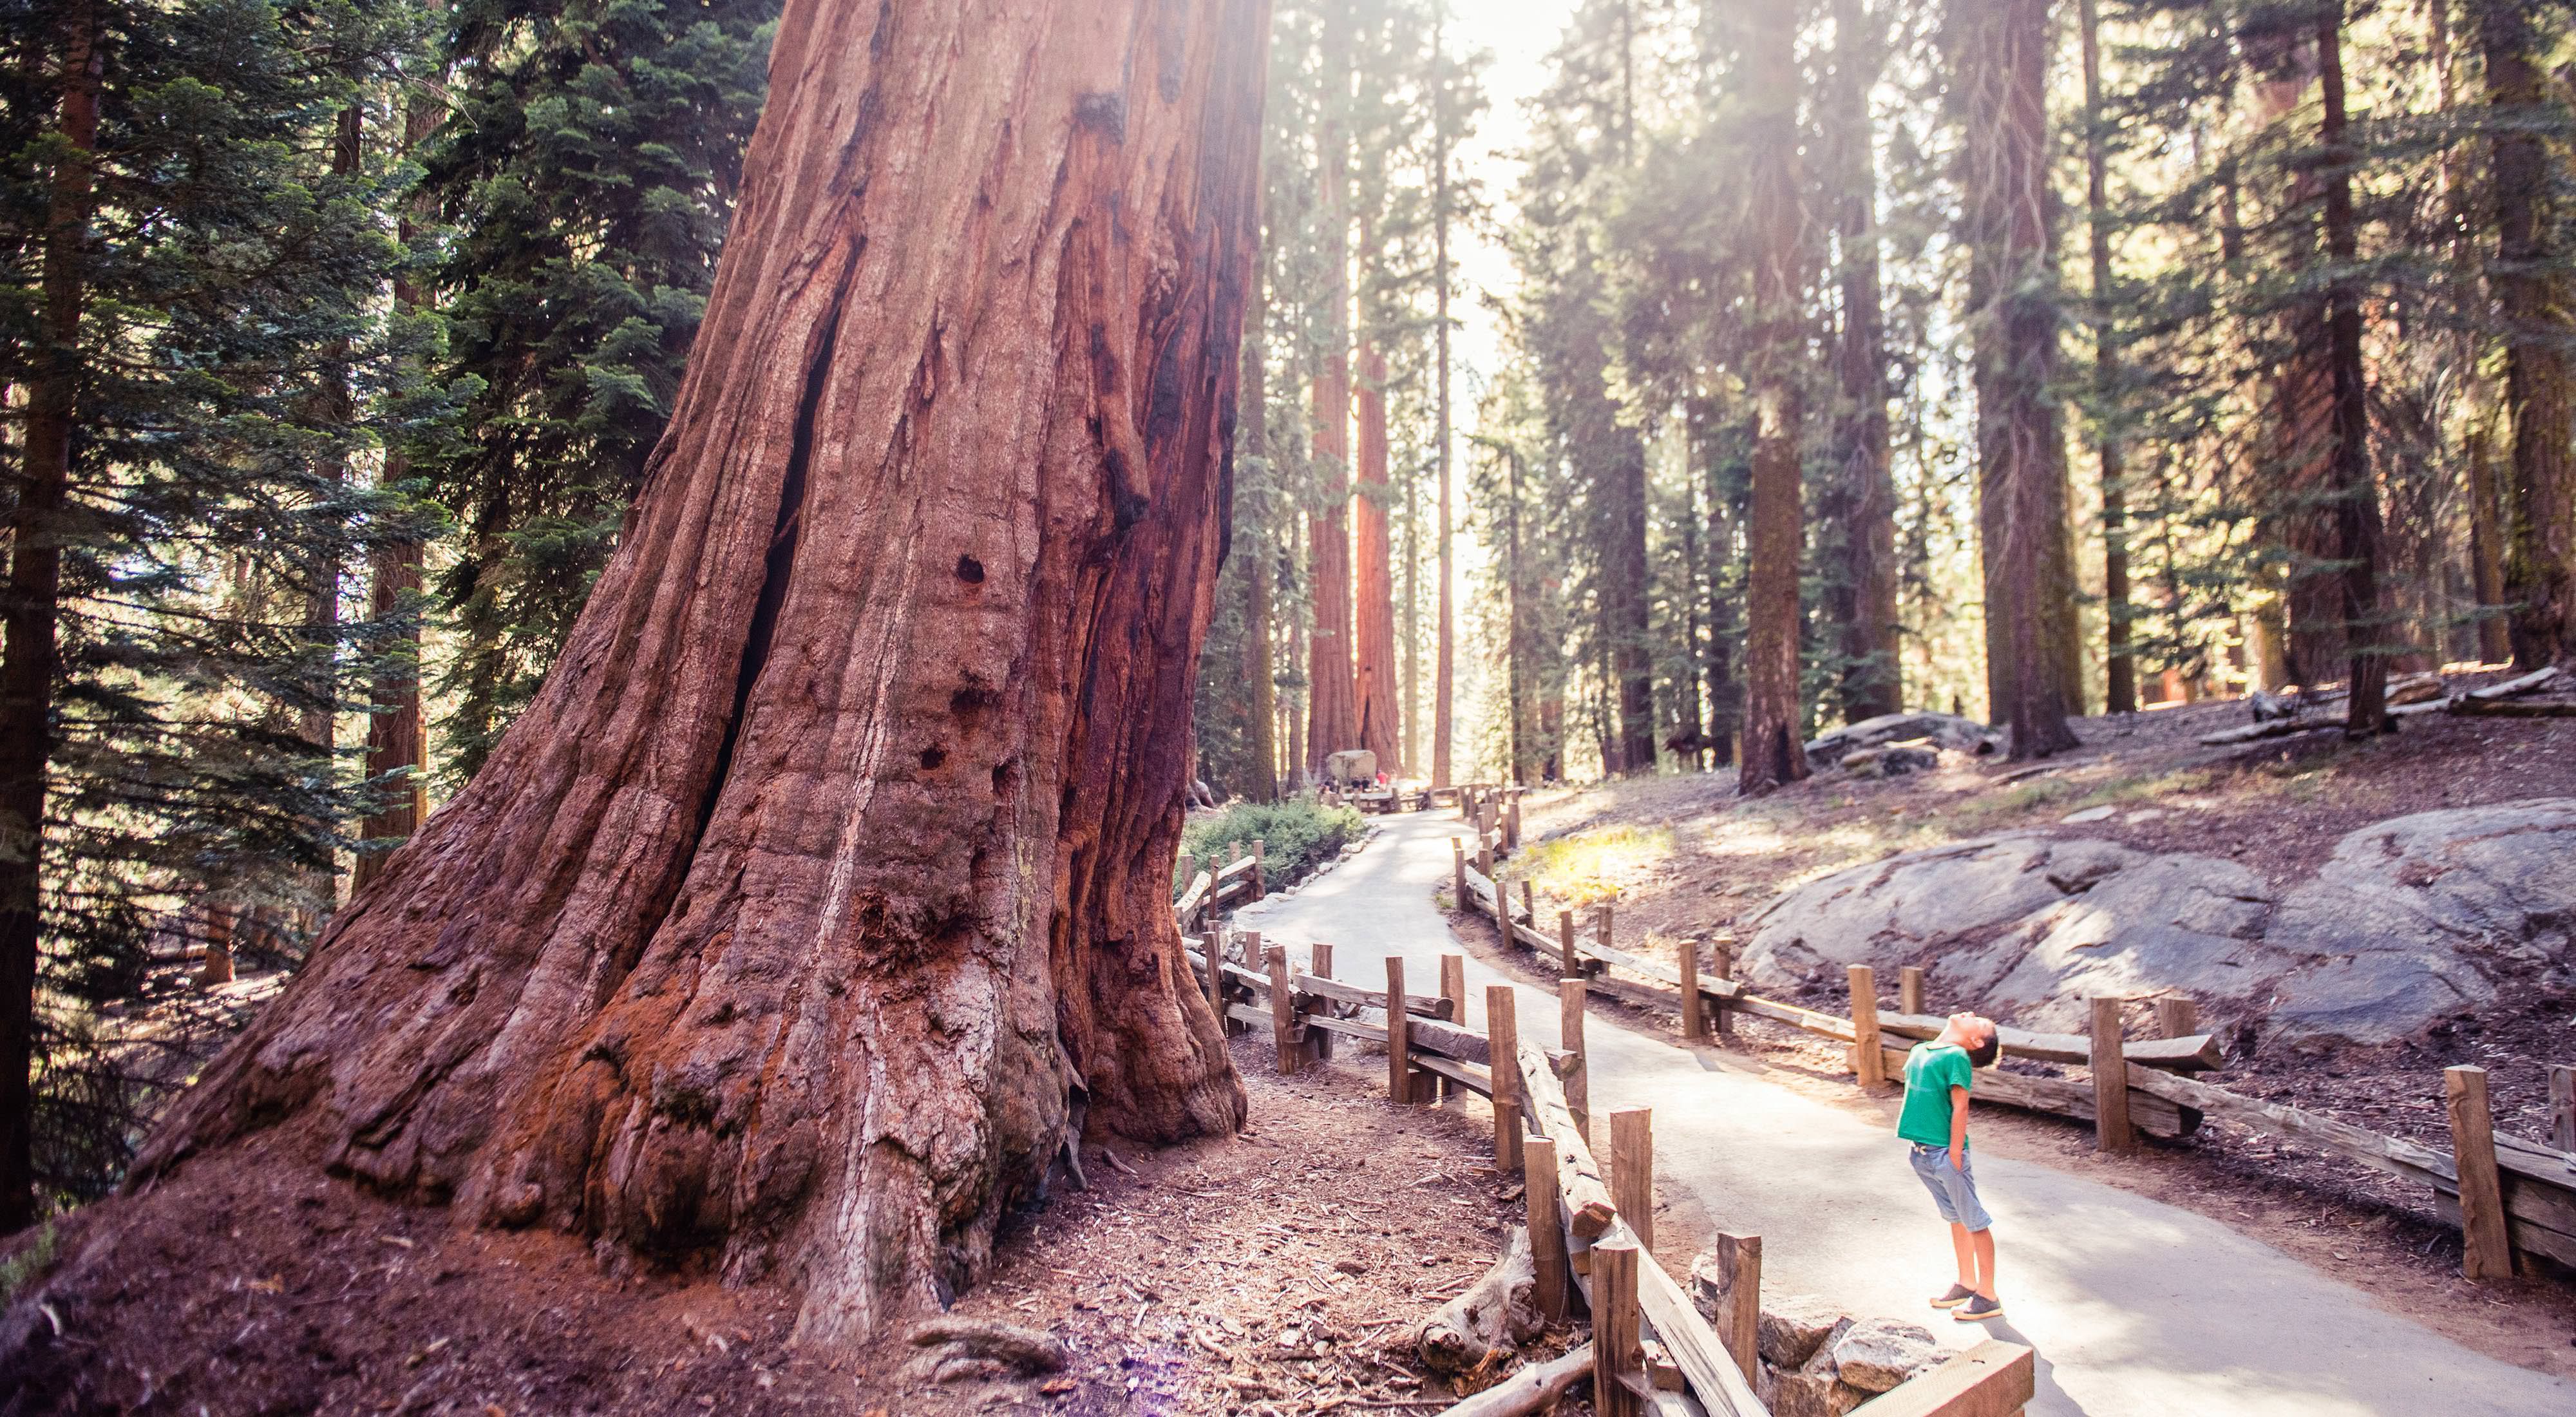  A little boy bends backwards to try to see the top of a sequoia.